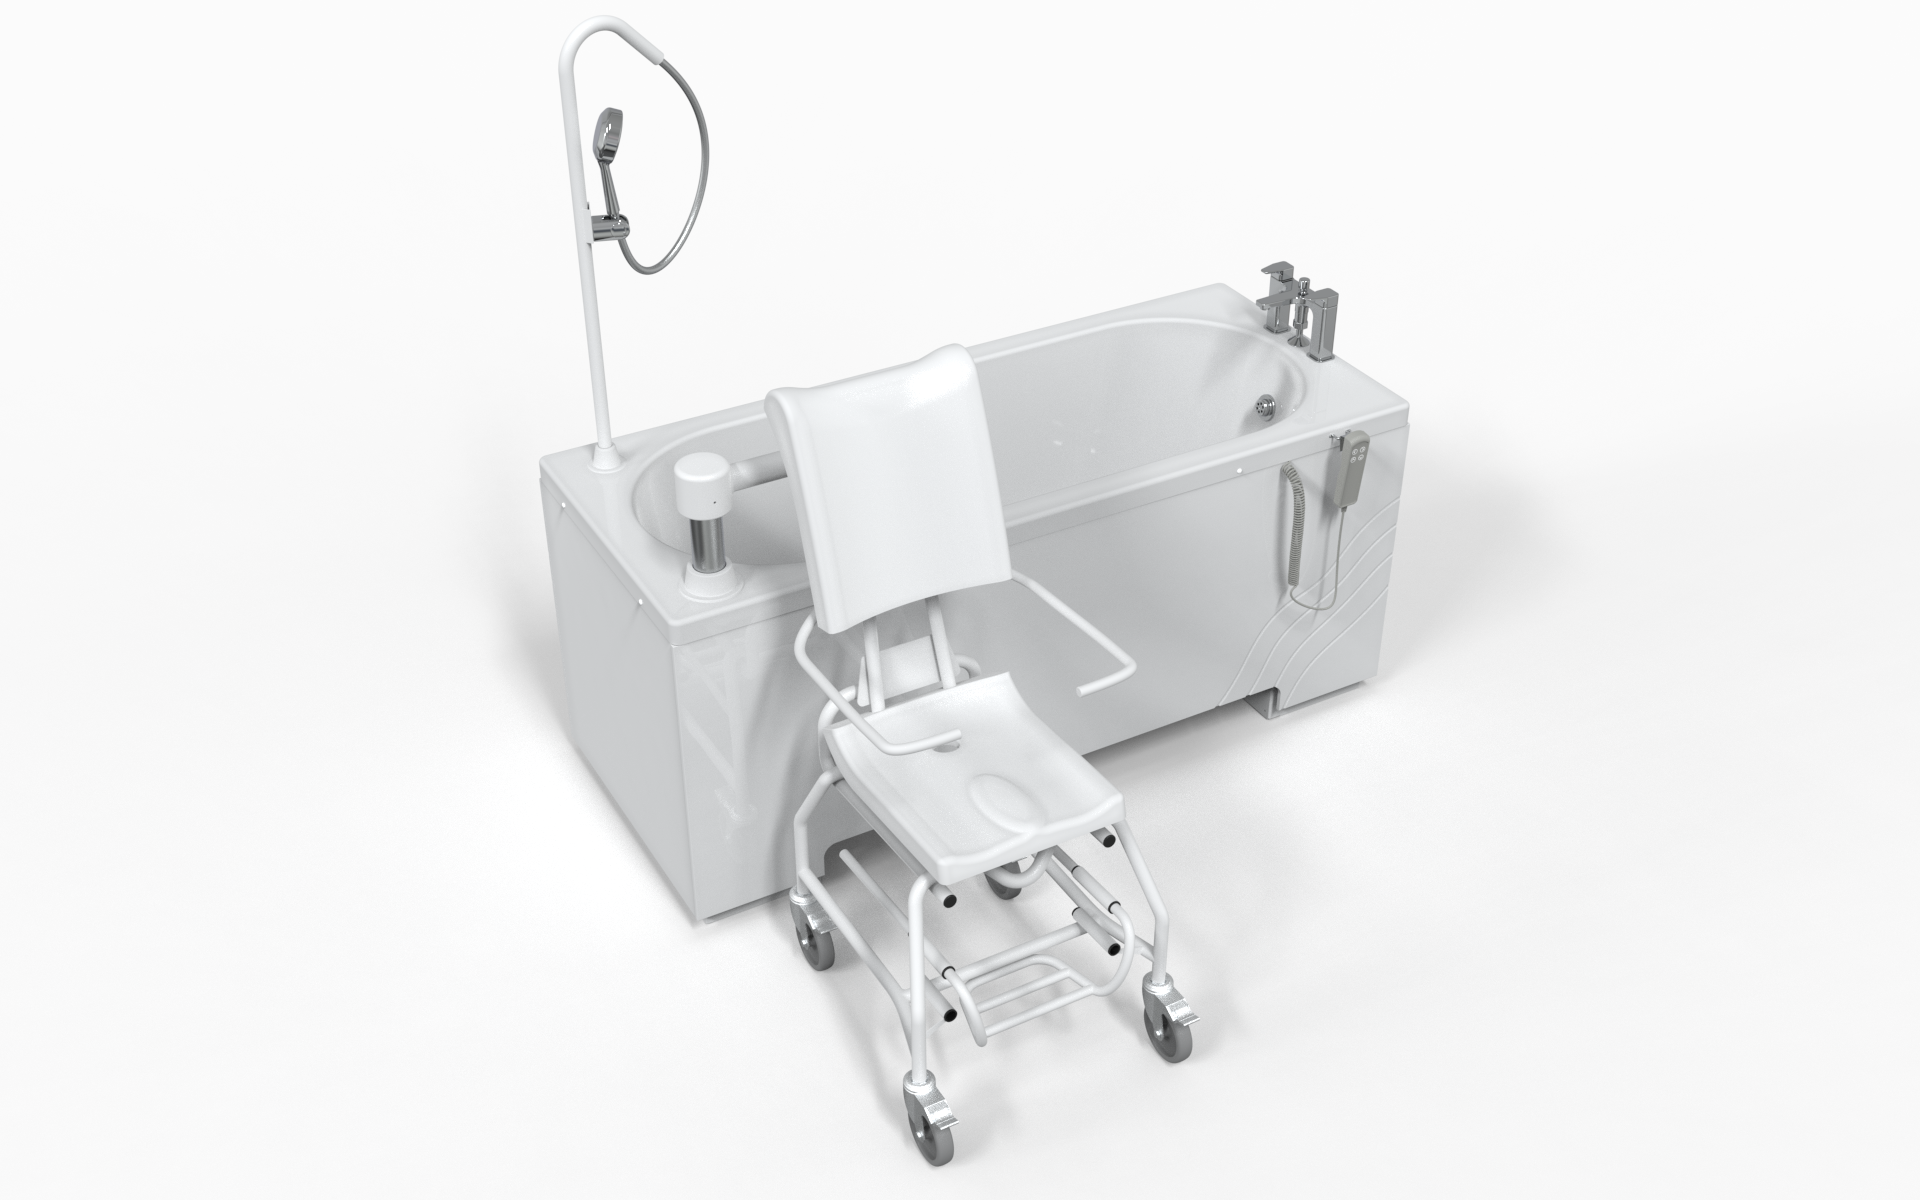 The Detachable Seat and Transporter System Protec Baths